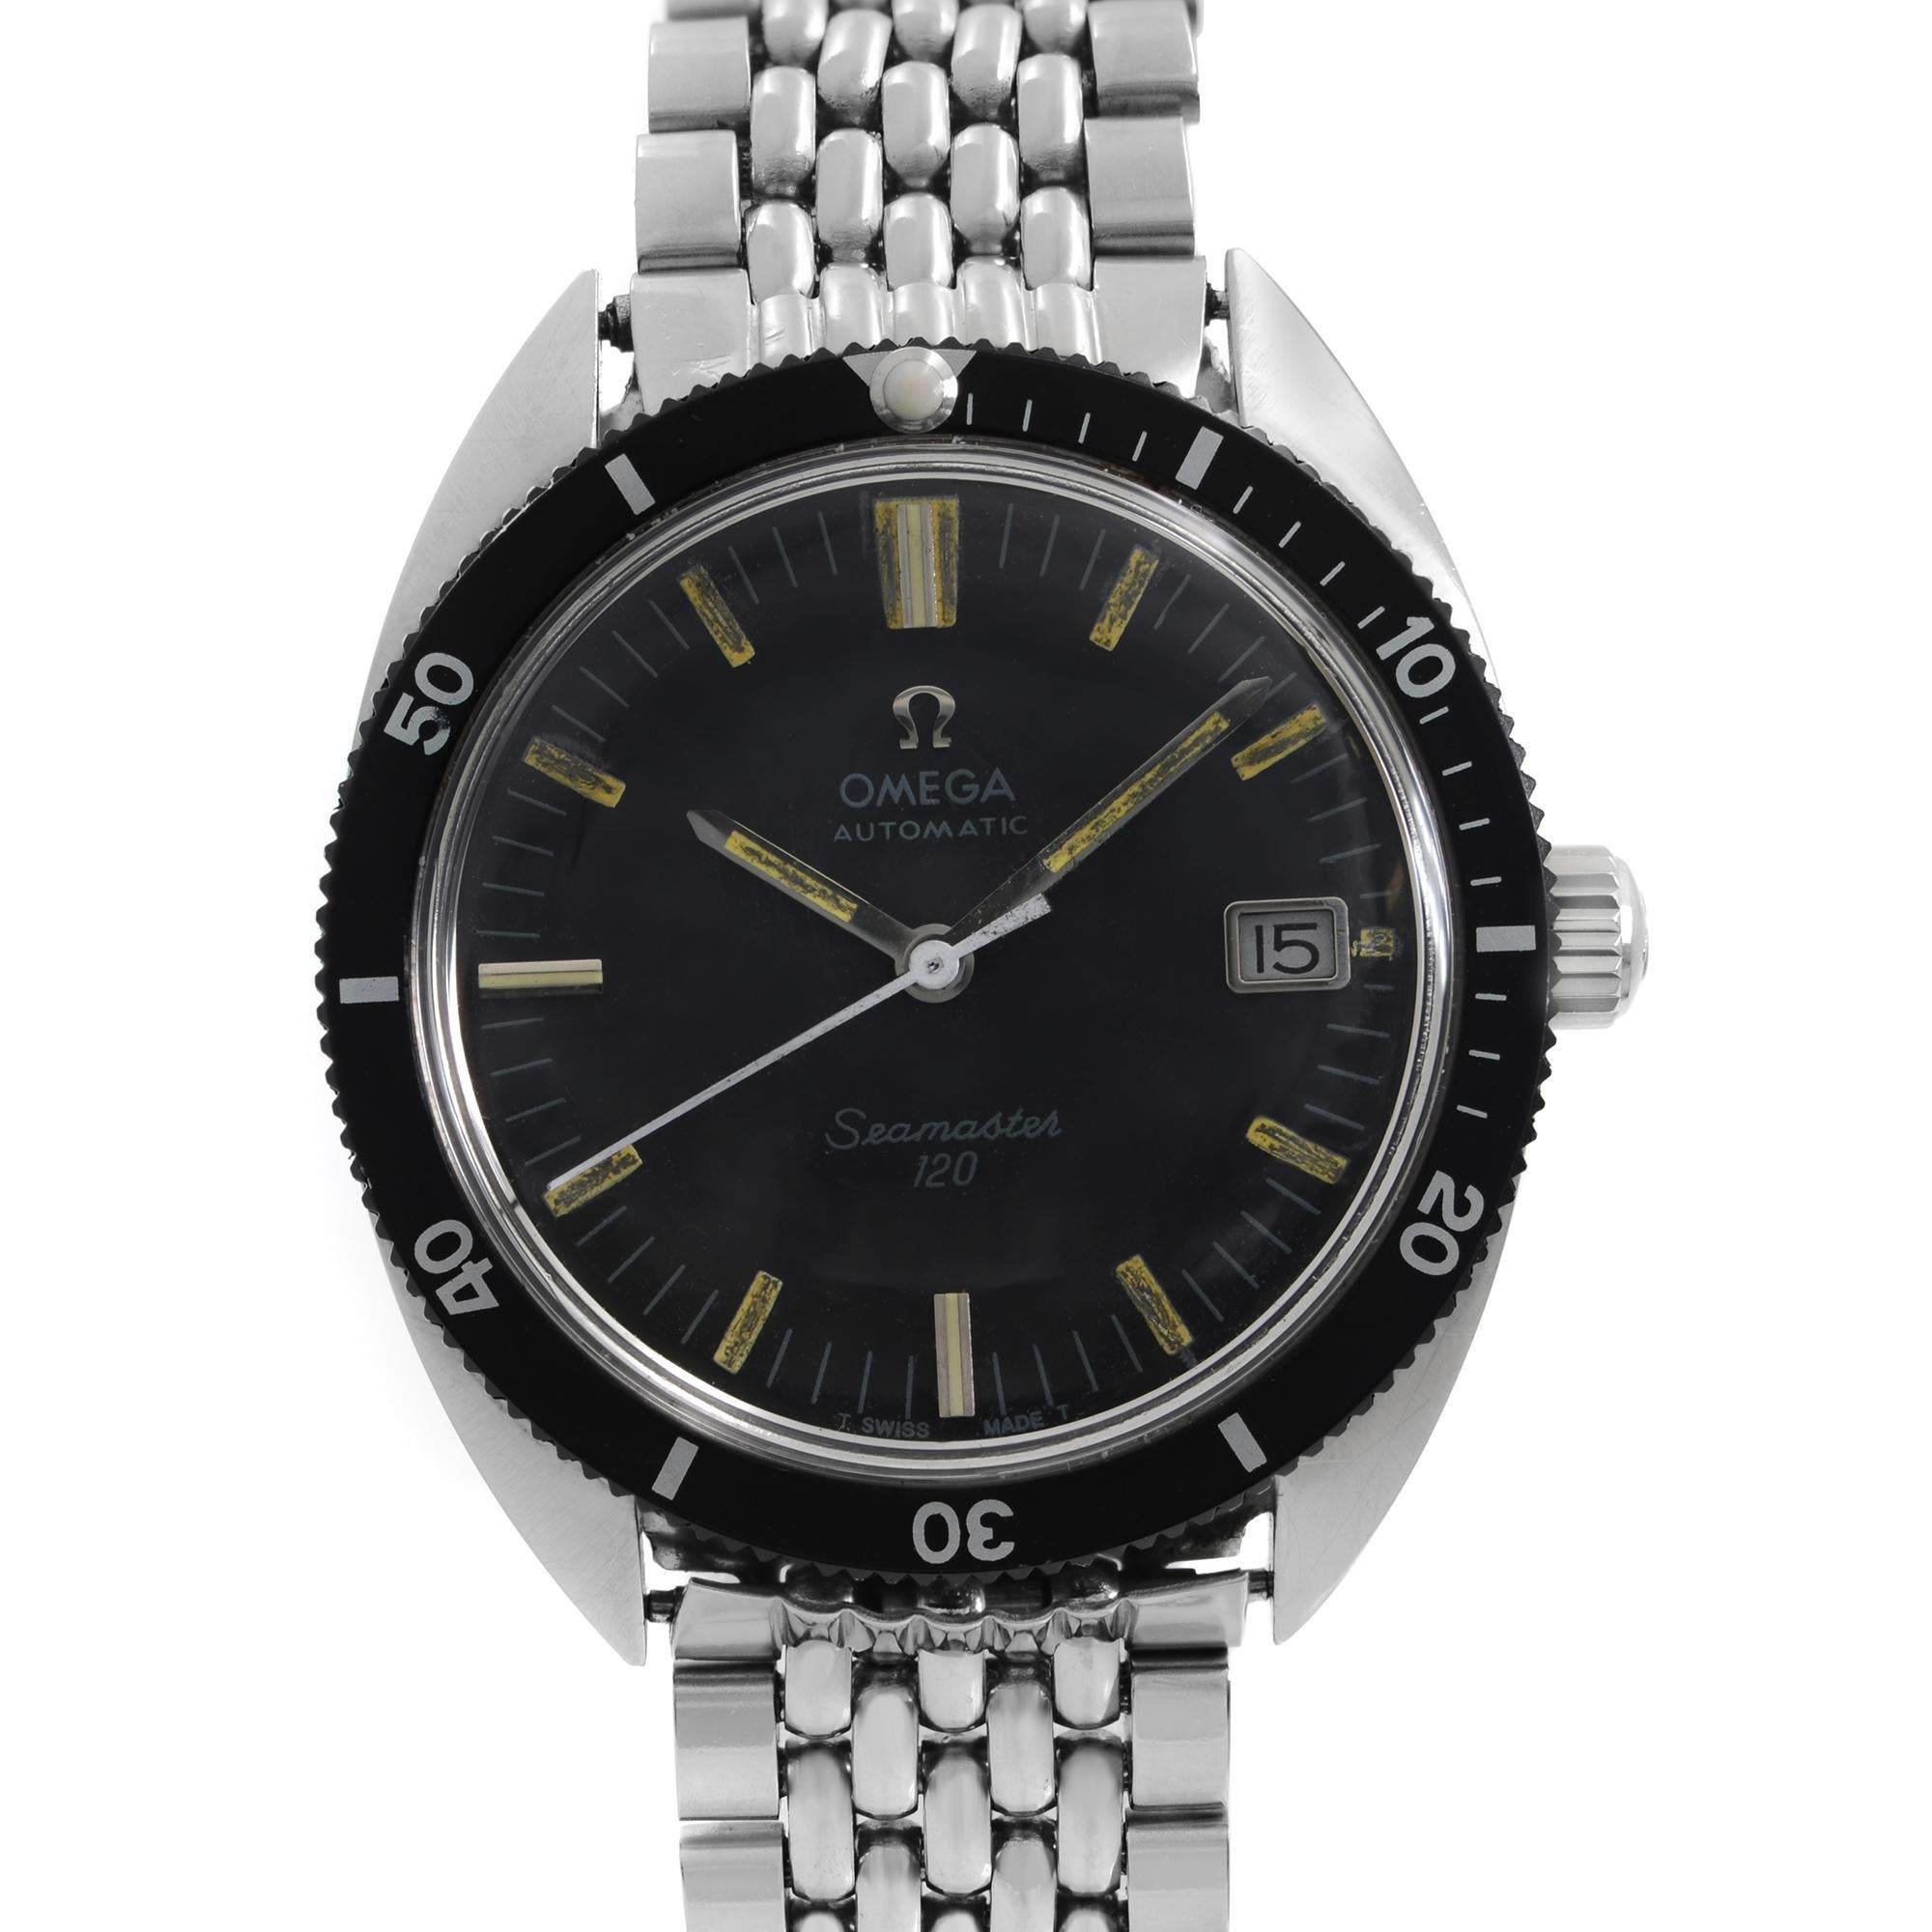 Pre-owned Vintage Omega Seamaster 120 37mm Stainless Steel Black Dial Men's Automatic Watch 135.027. Moderate Slack on the Bracelet, Scratches, and Nicks on Case, Bezel, and Bracelet, Scratches on Crystal, dirt, and oxidation on Hands and Hour